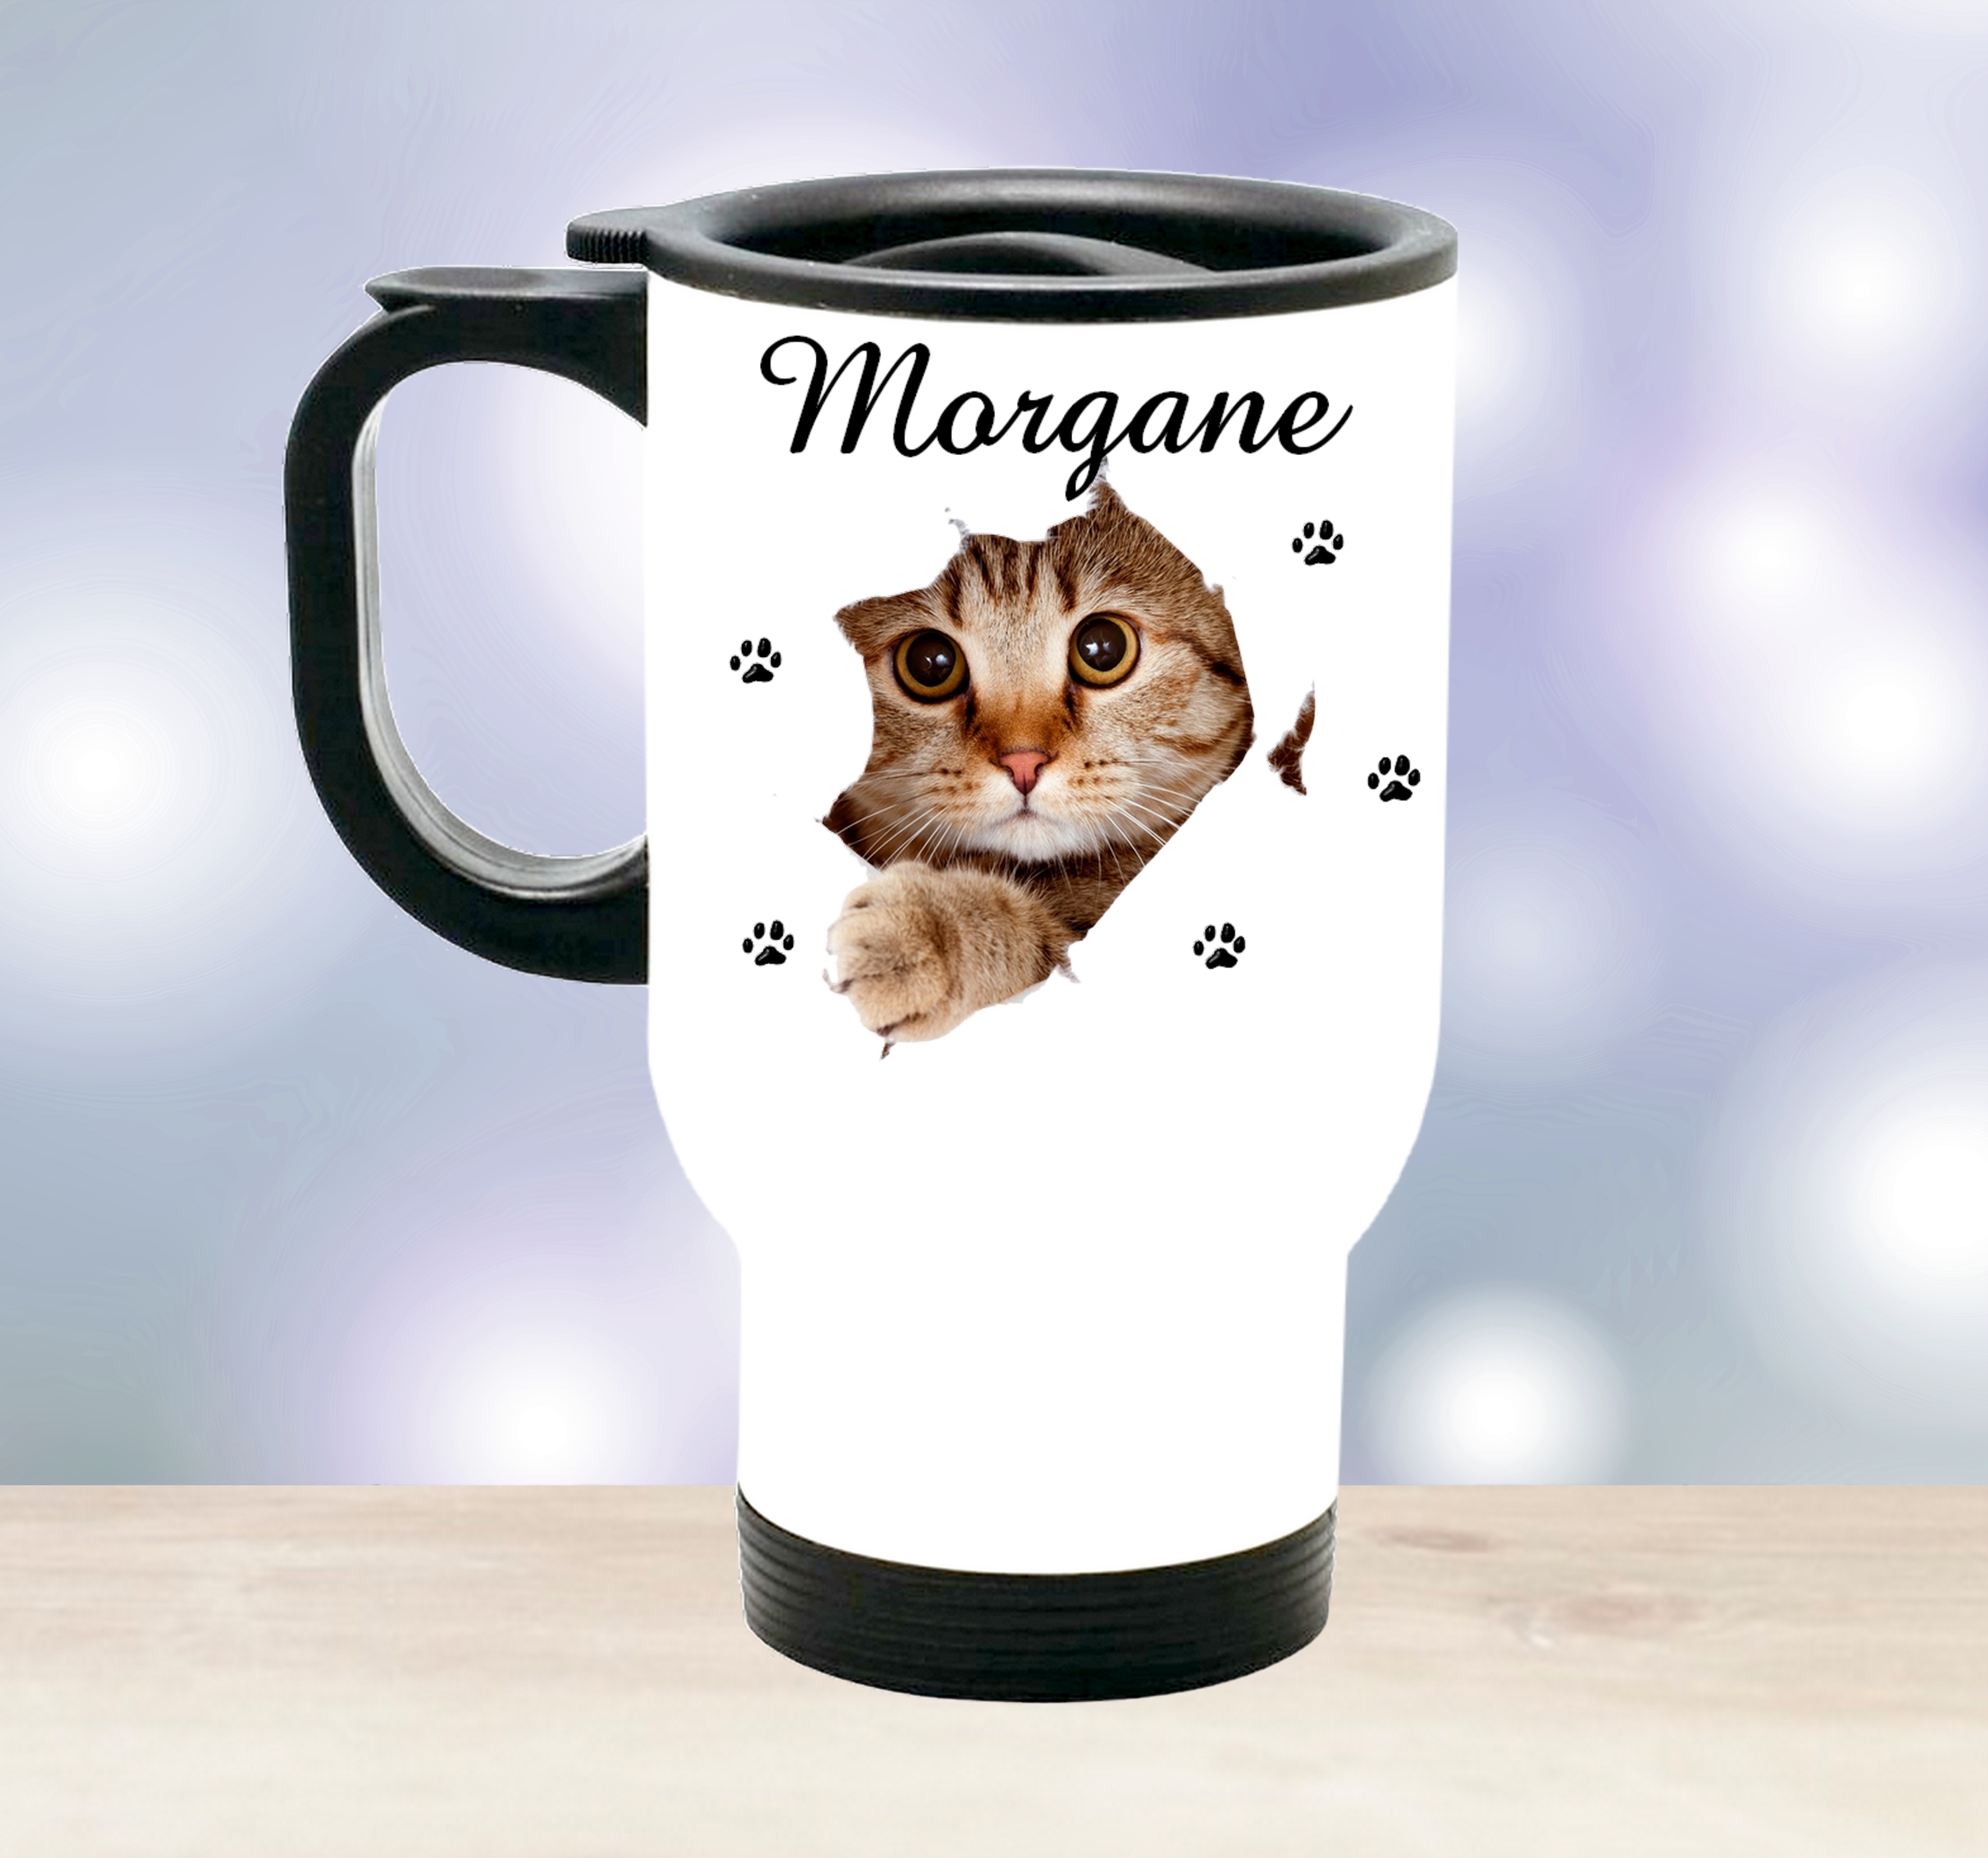 tasse isotherme chat personnalisée